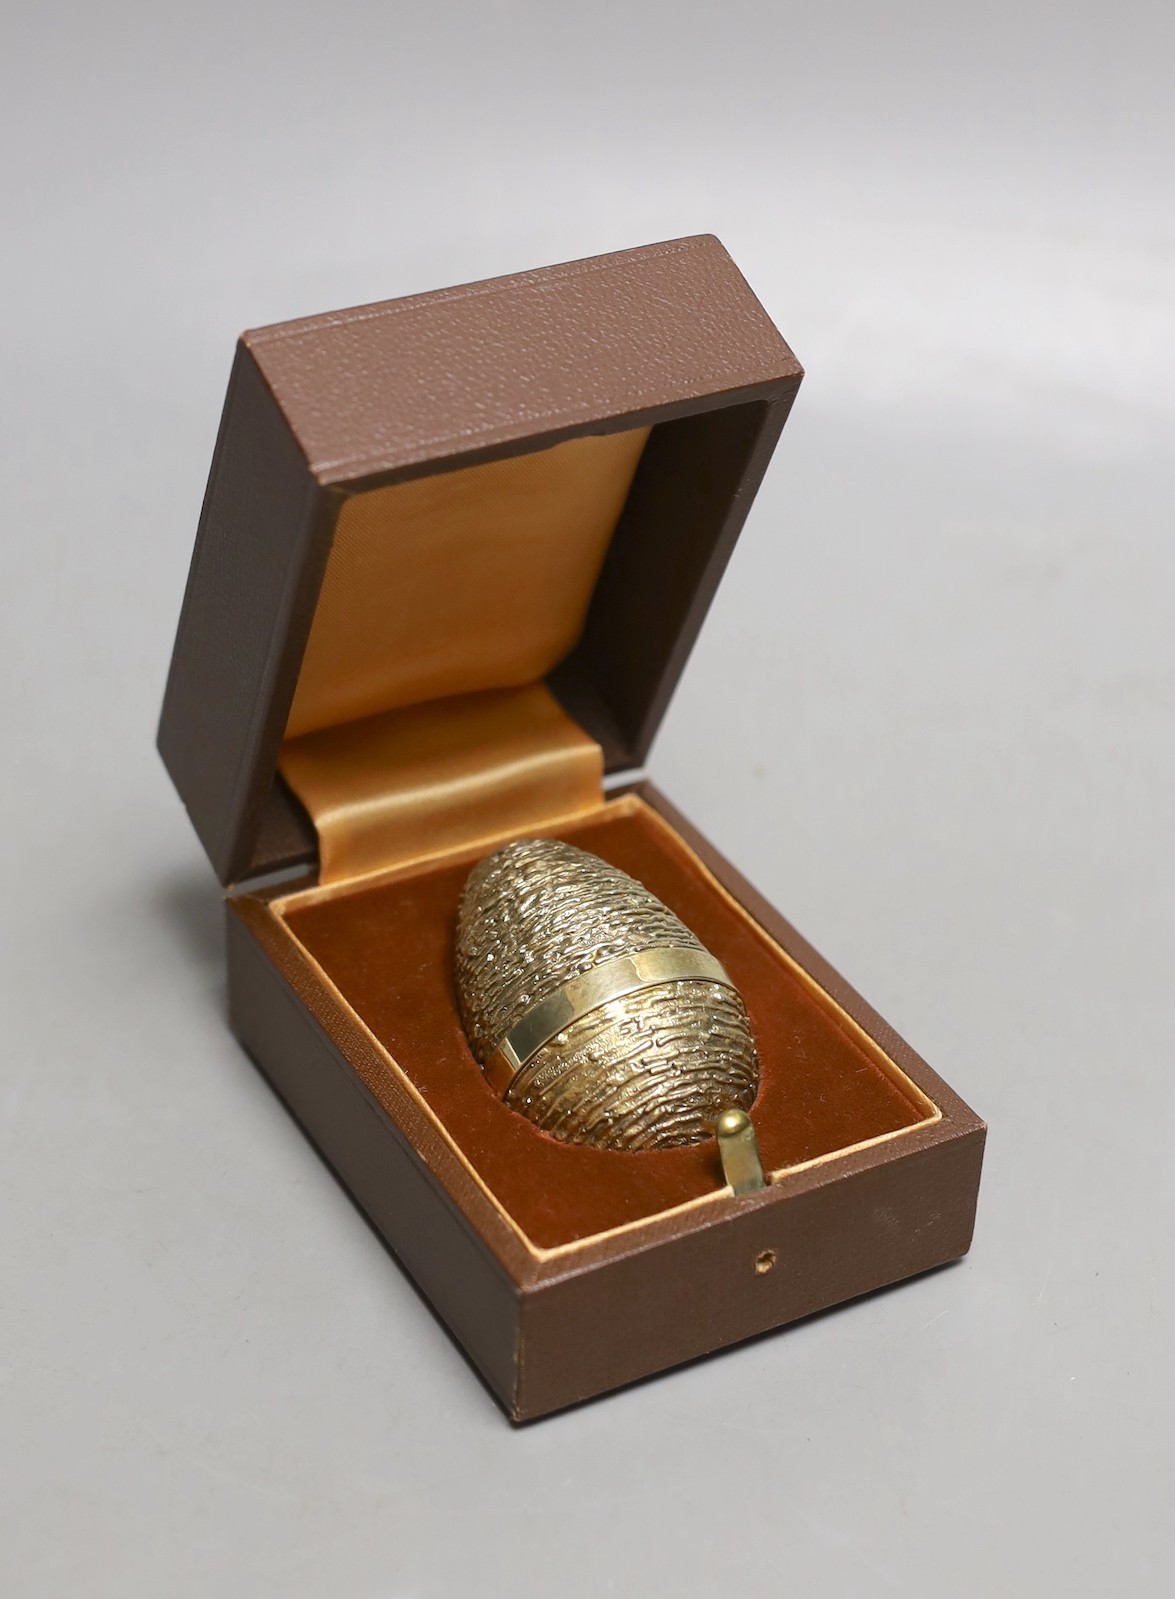 A cased modern silver gilt surprise egg, in the manner of Stuart Devlin, by Richard Lawrence Geere, London, 1976, 67mm, with bust interior.